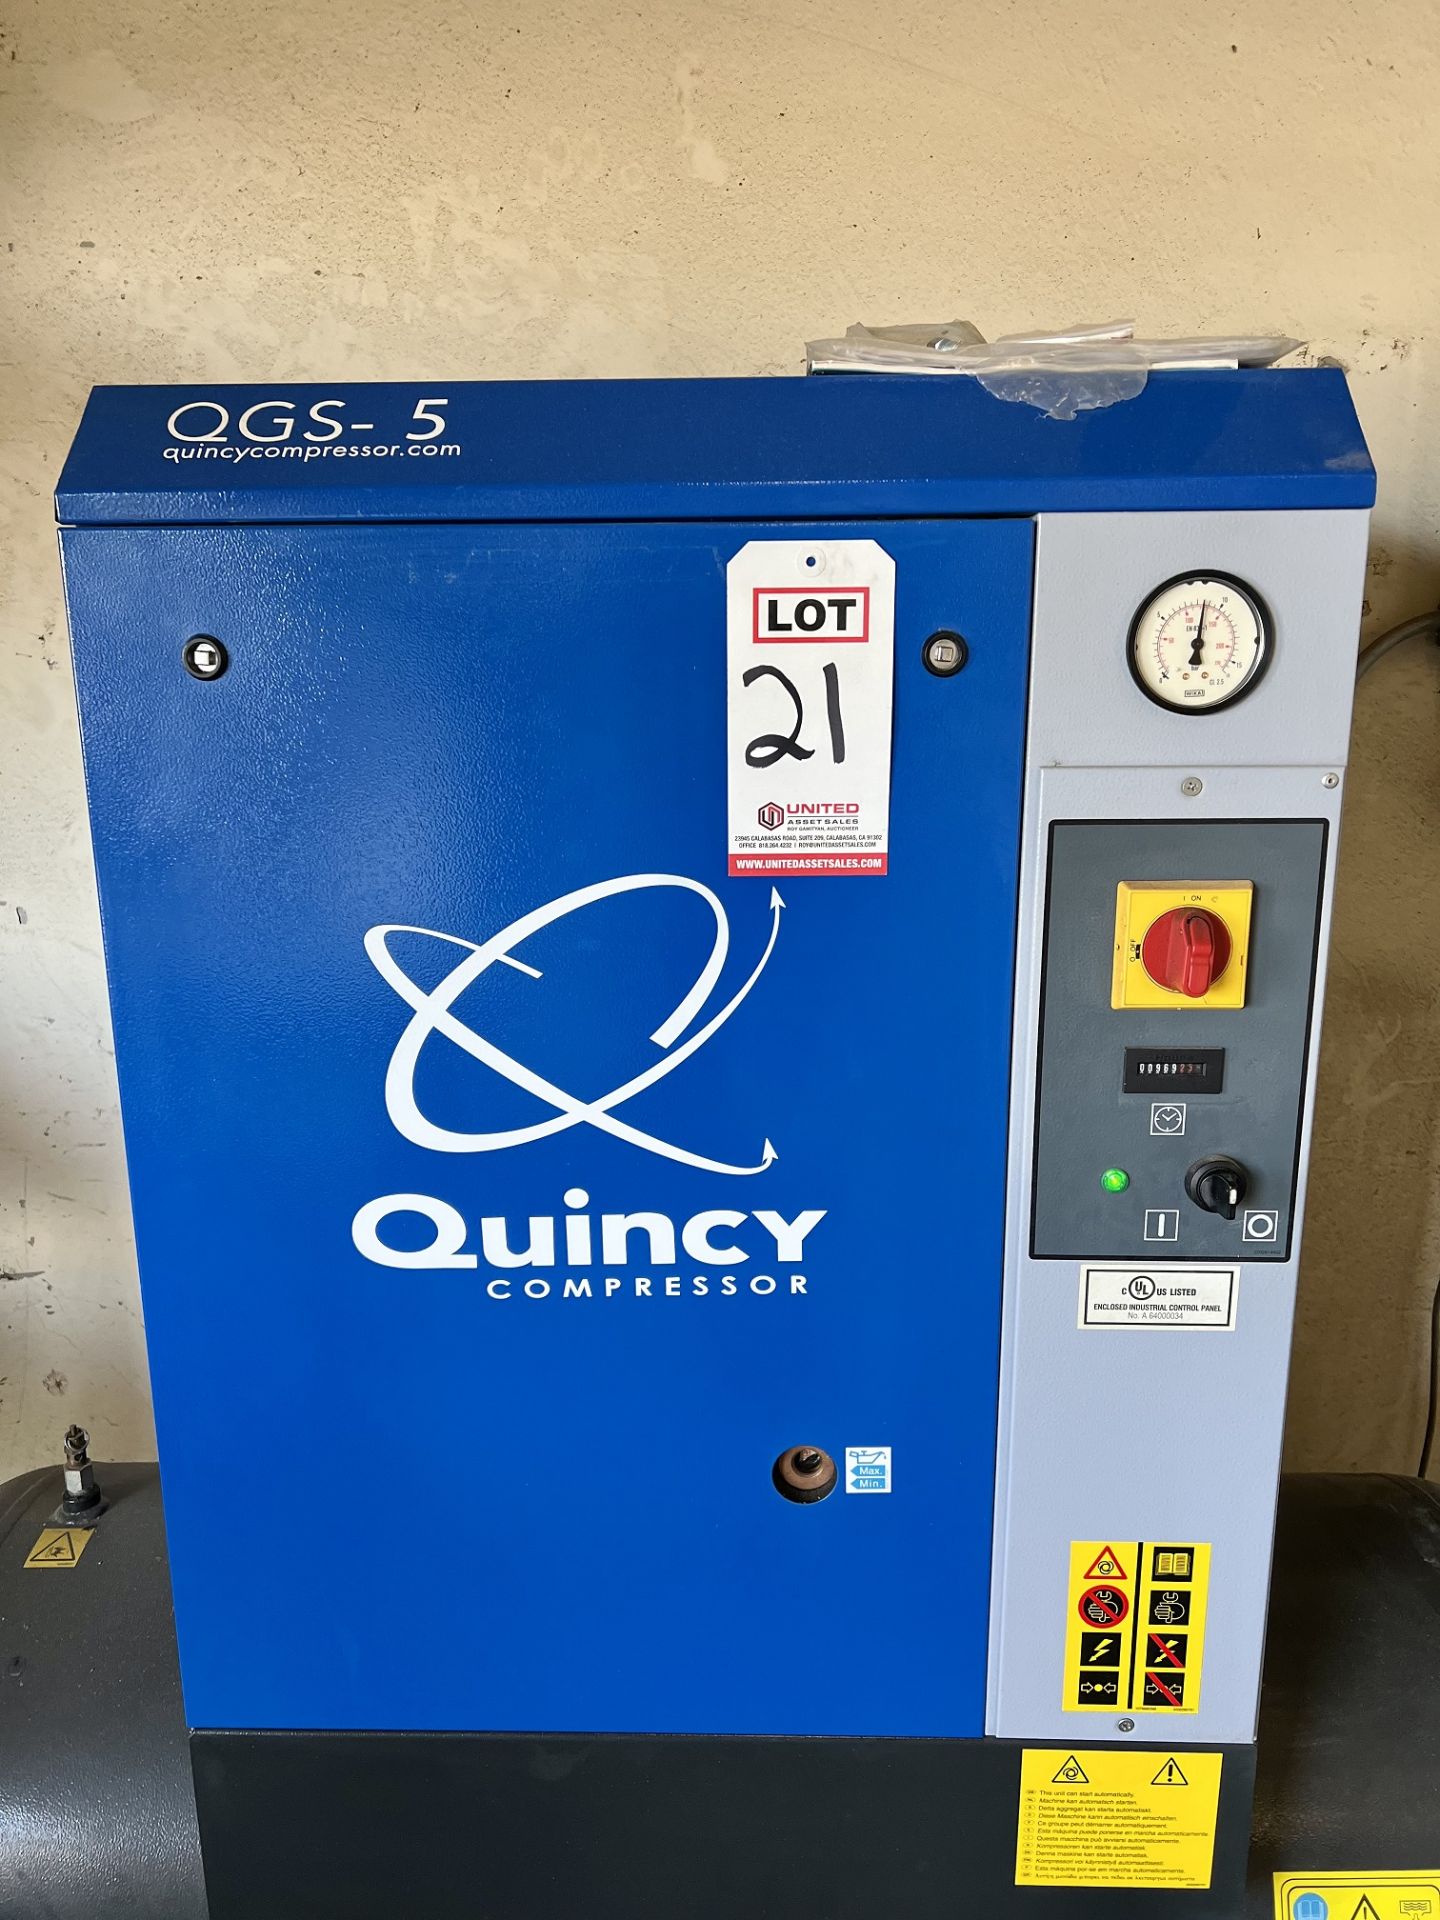 2016 QUINCY QGS-5 ROTARY SCREW COMPRESSOR, 5 HP, 969 HOURS, S/N CAI921596 - Image 3 of 5